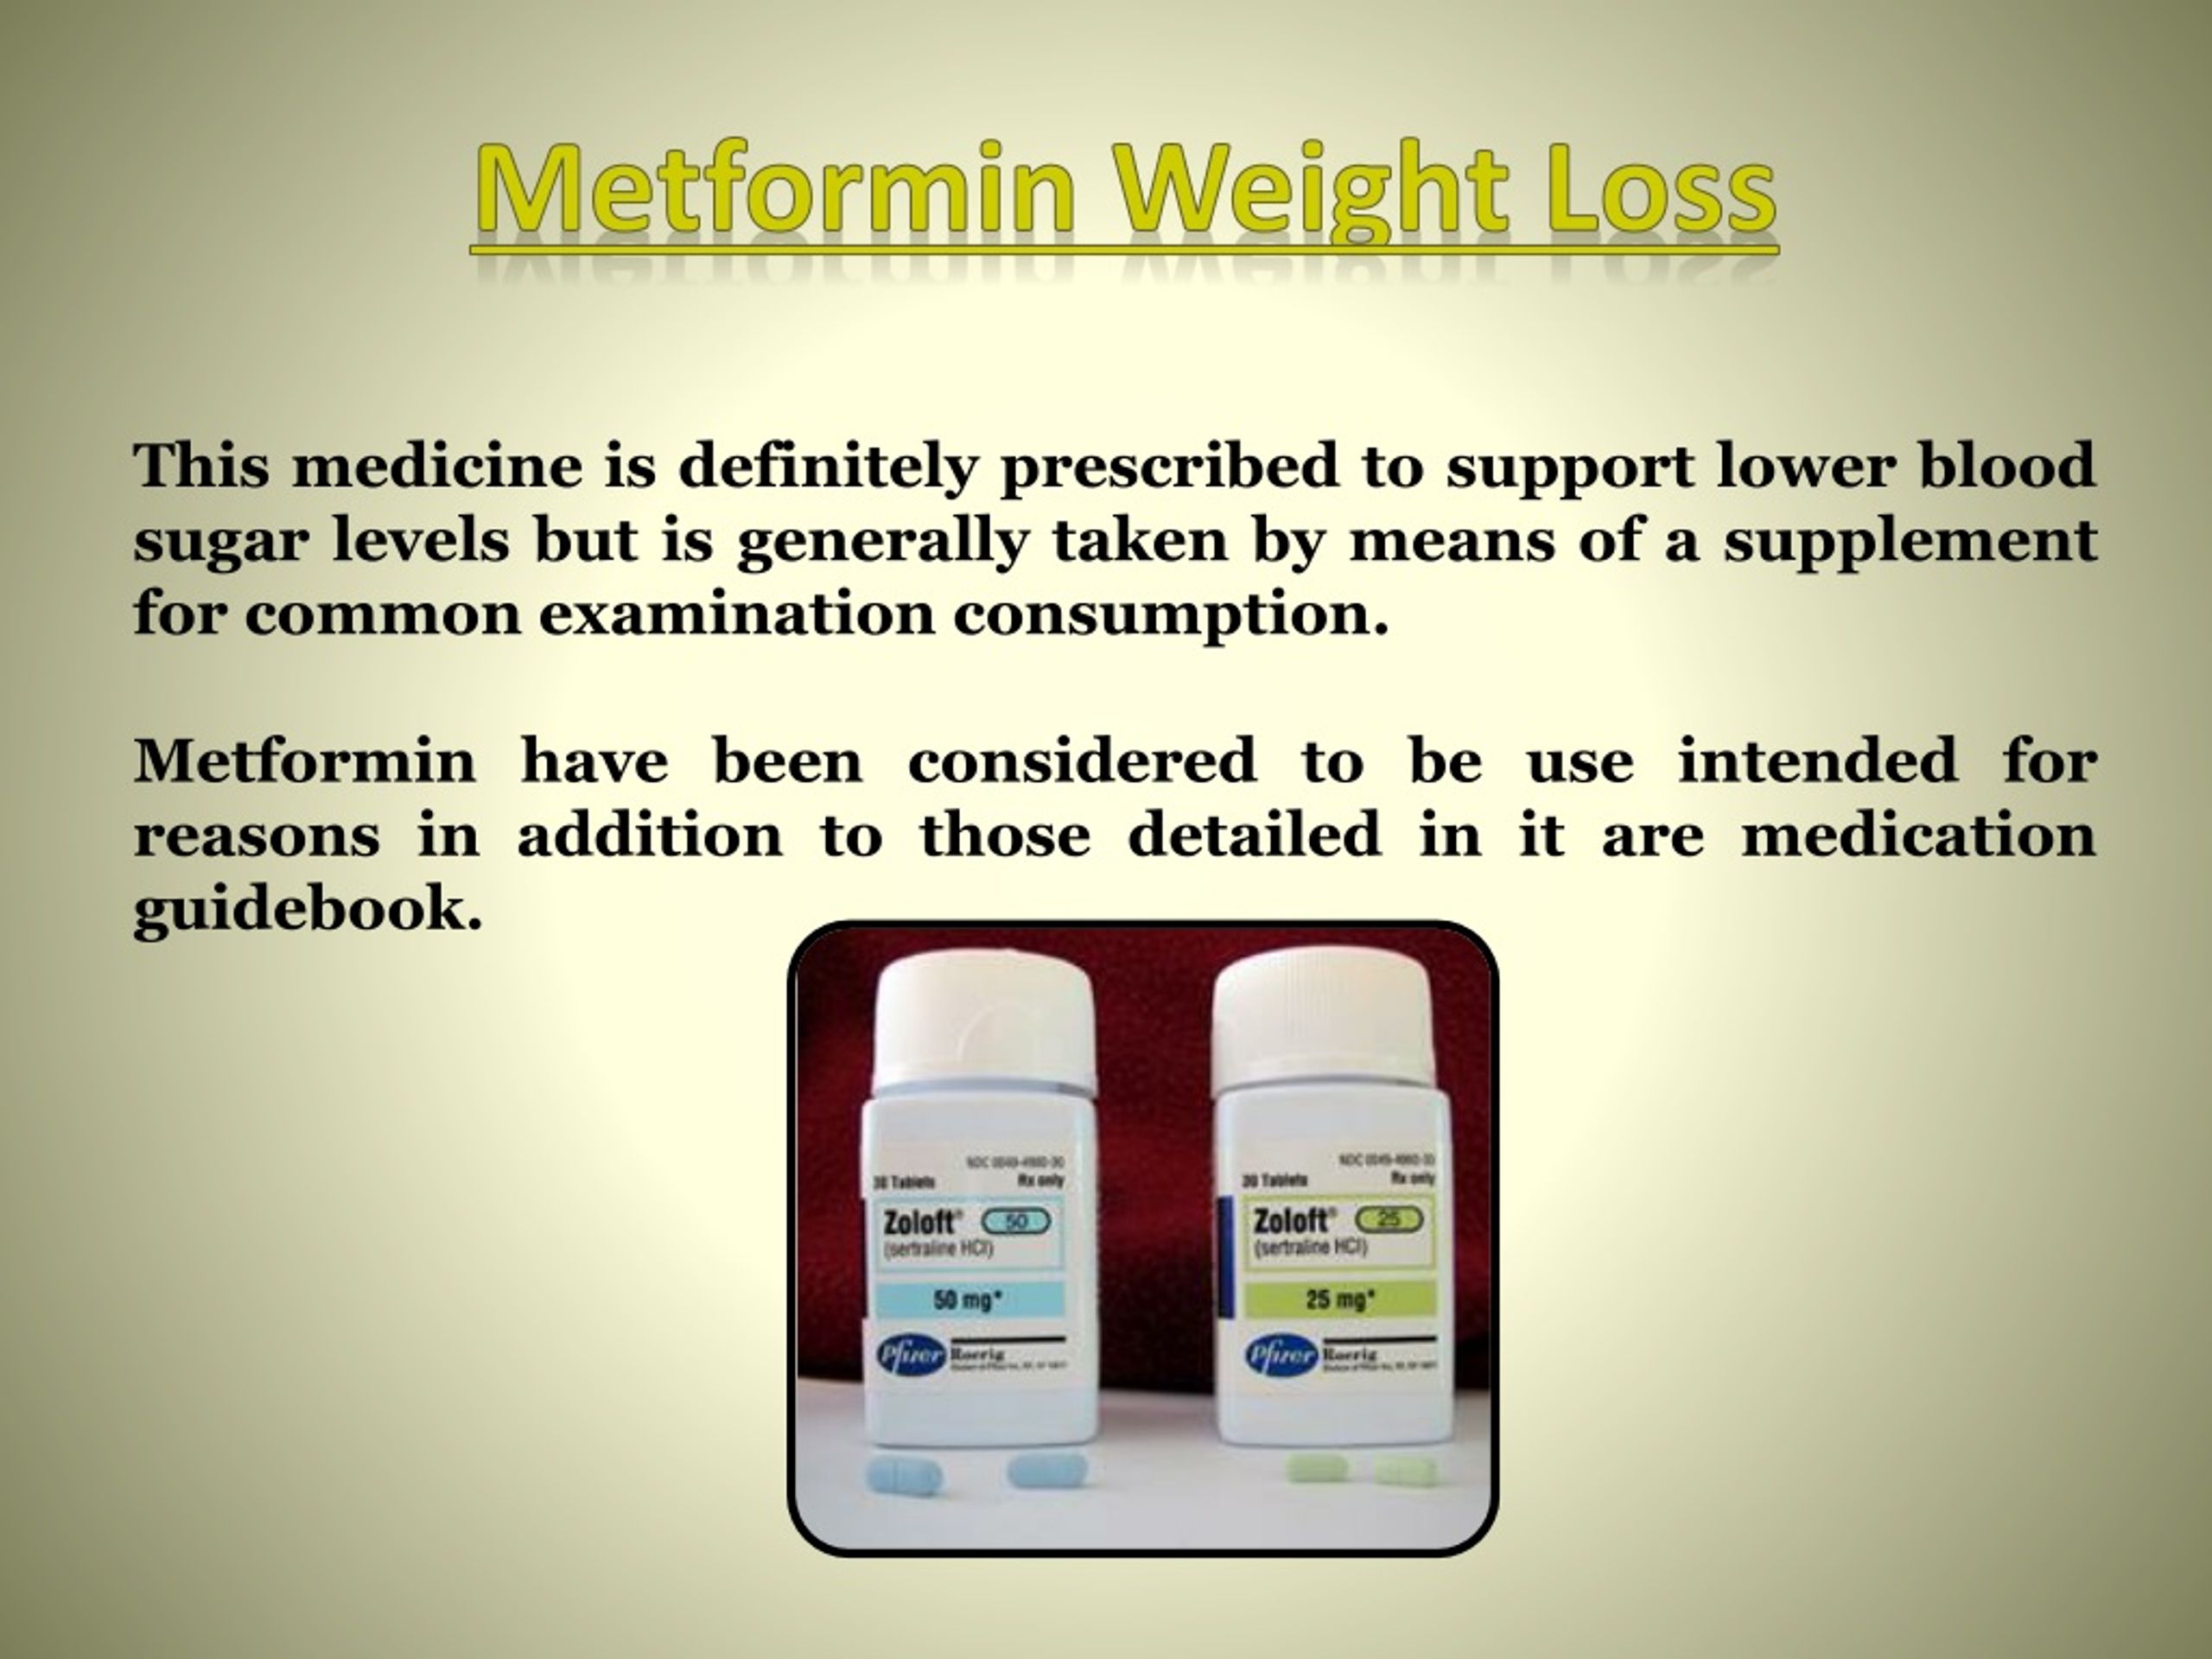 how does metformin work for weight loss